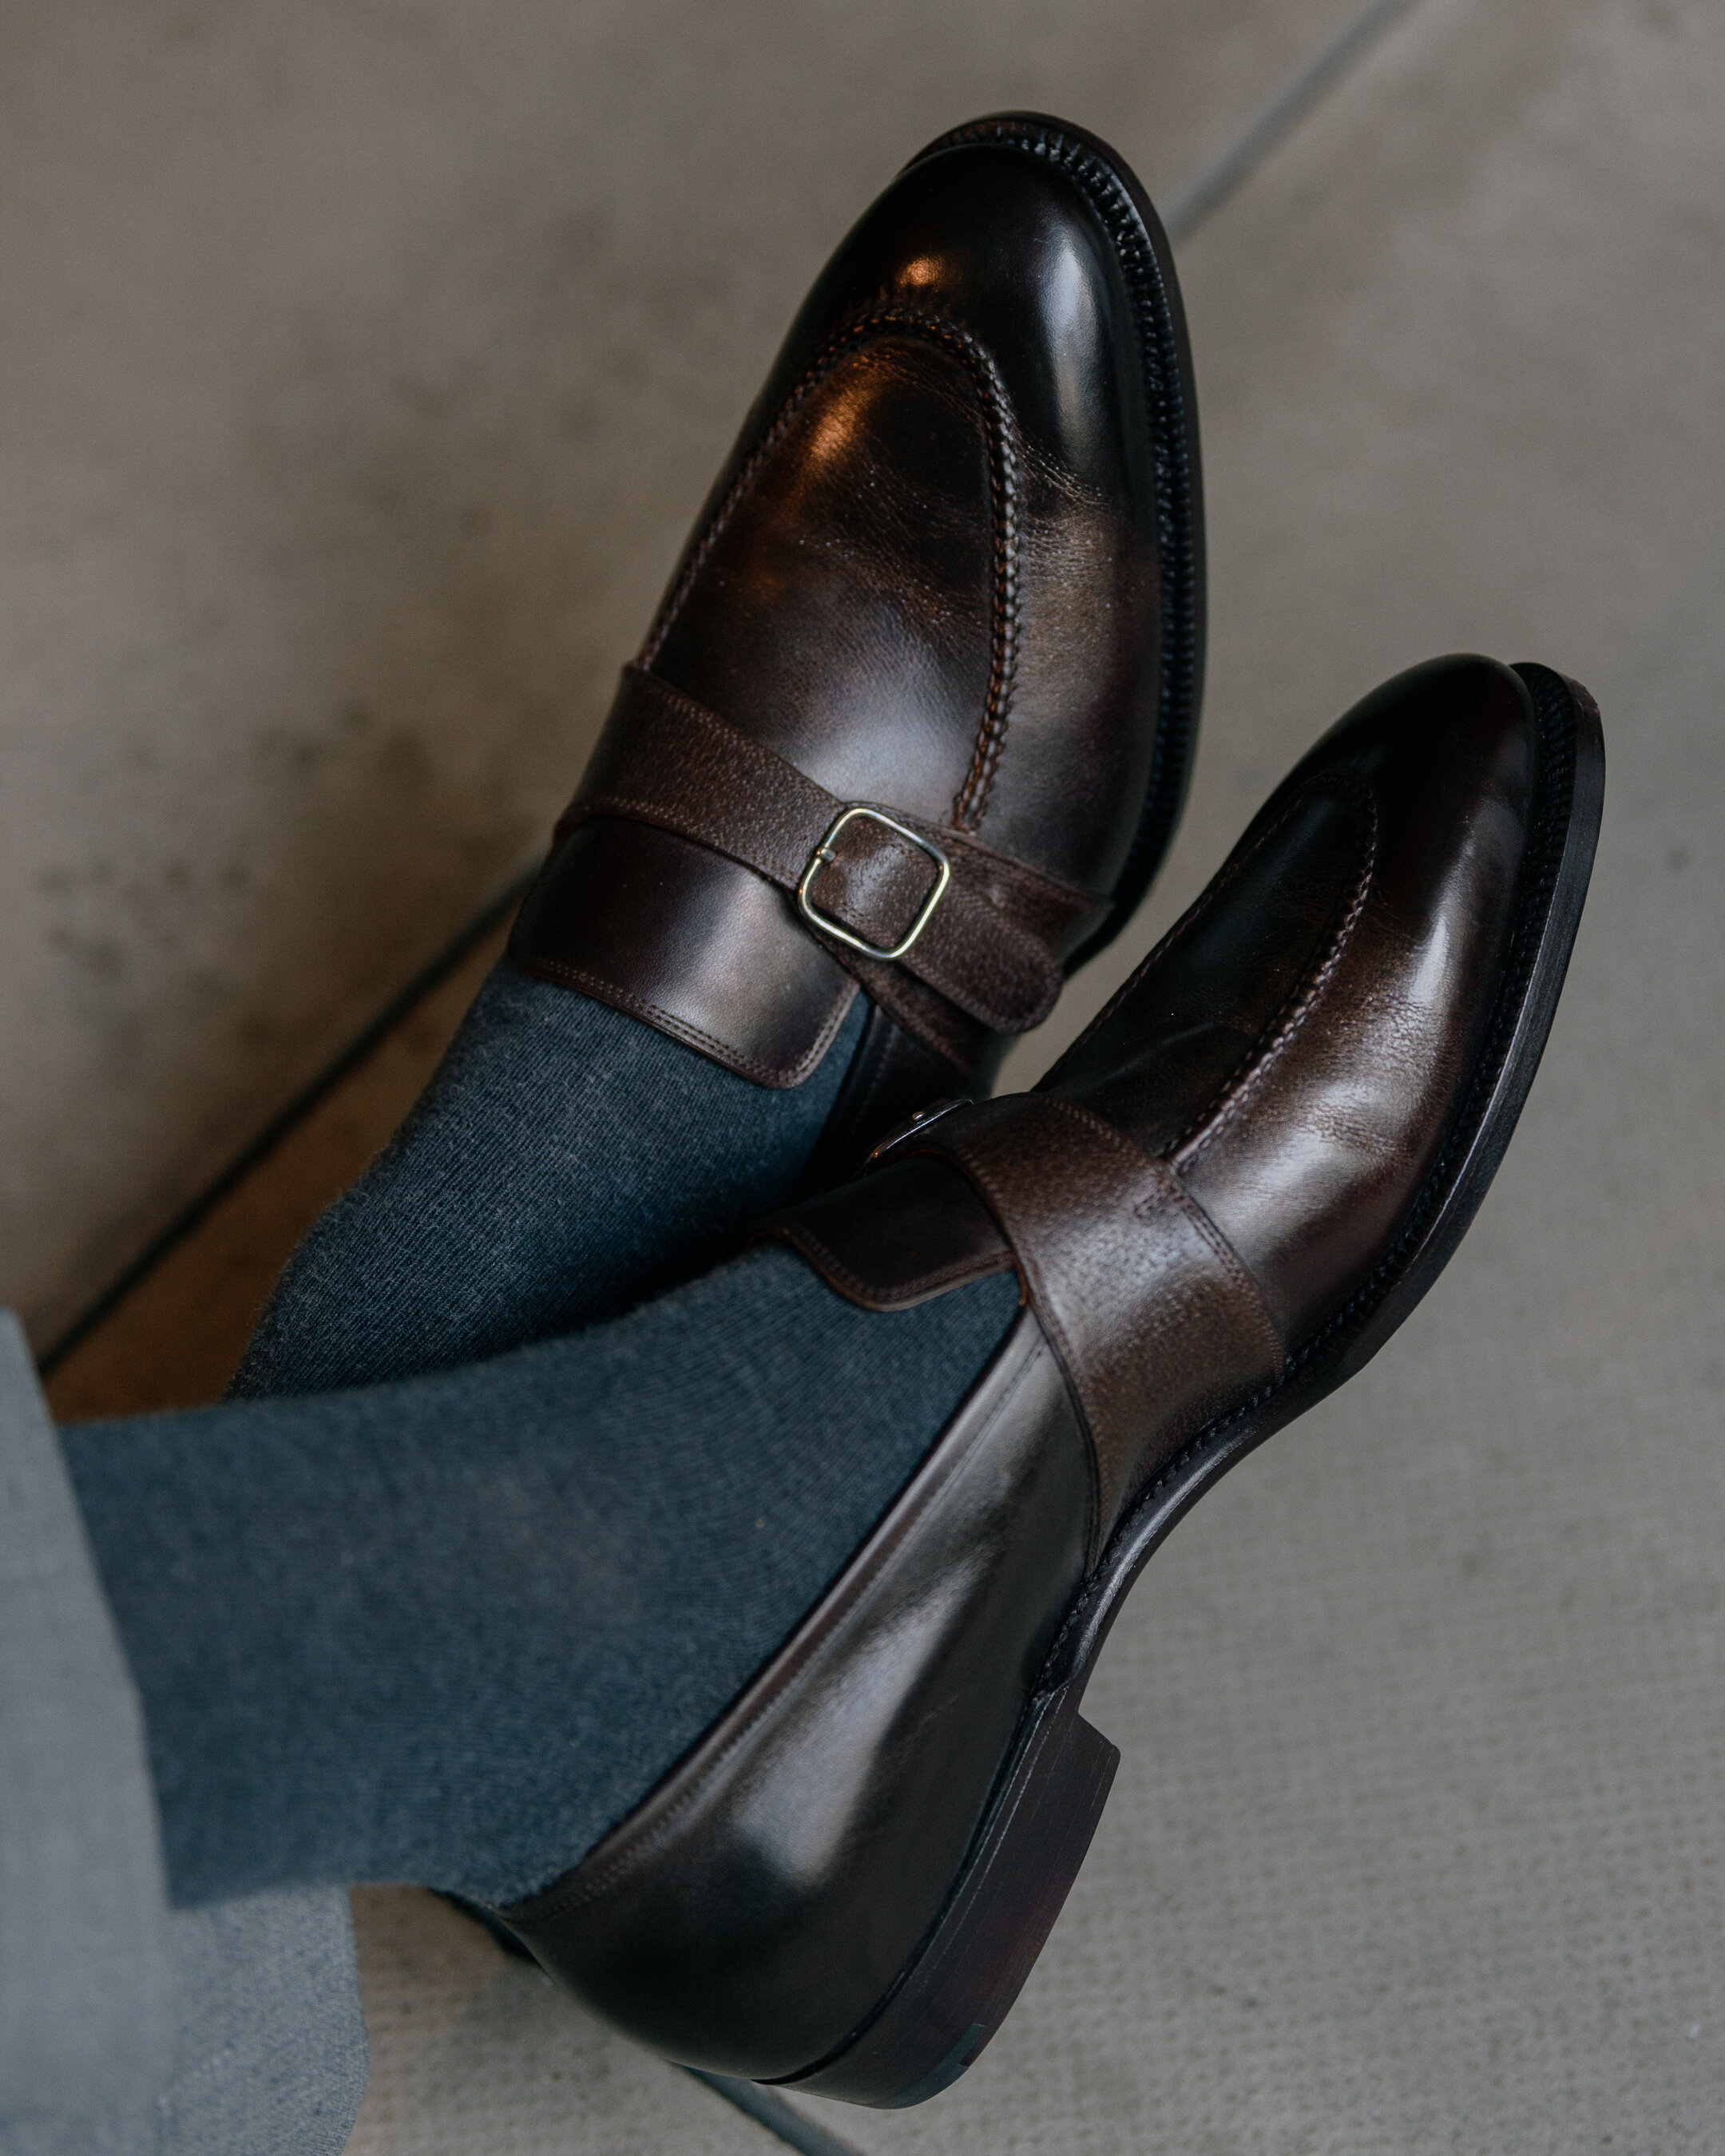 Khamai Loafers by Stefano Bember for The Anthology - Espresso — The ...